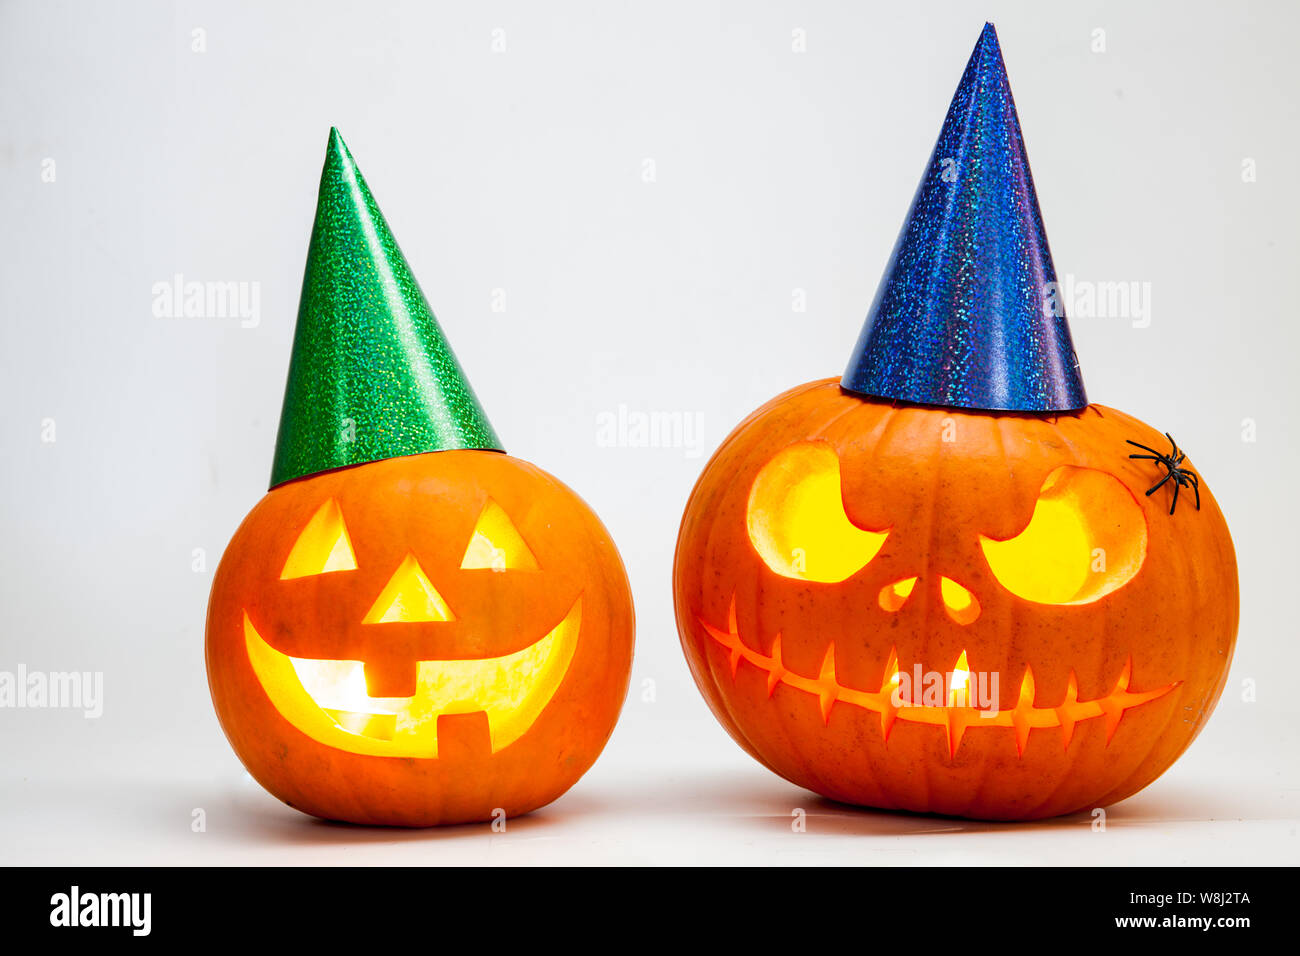 Two Halloween pumpkin head jack lantern with burning candles with festive hubcap isolated on white background Stock Photo